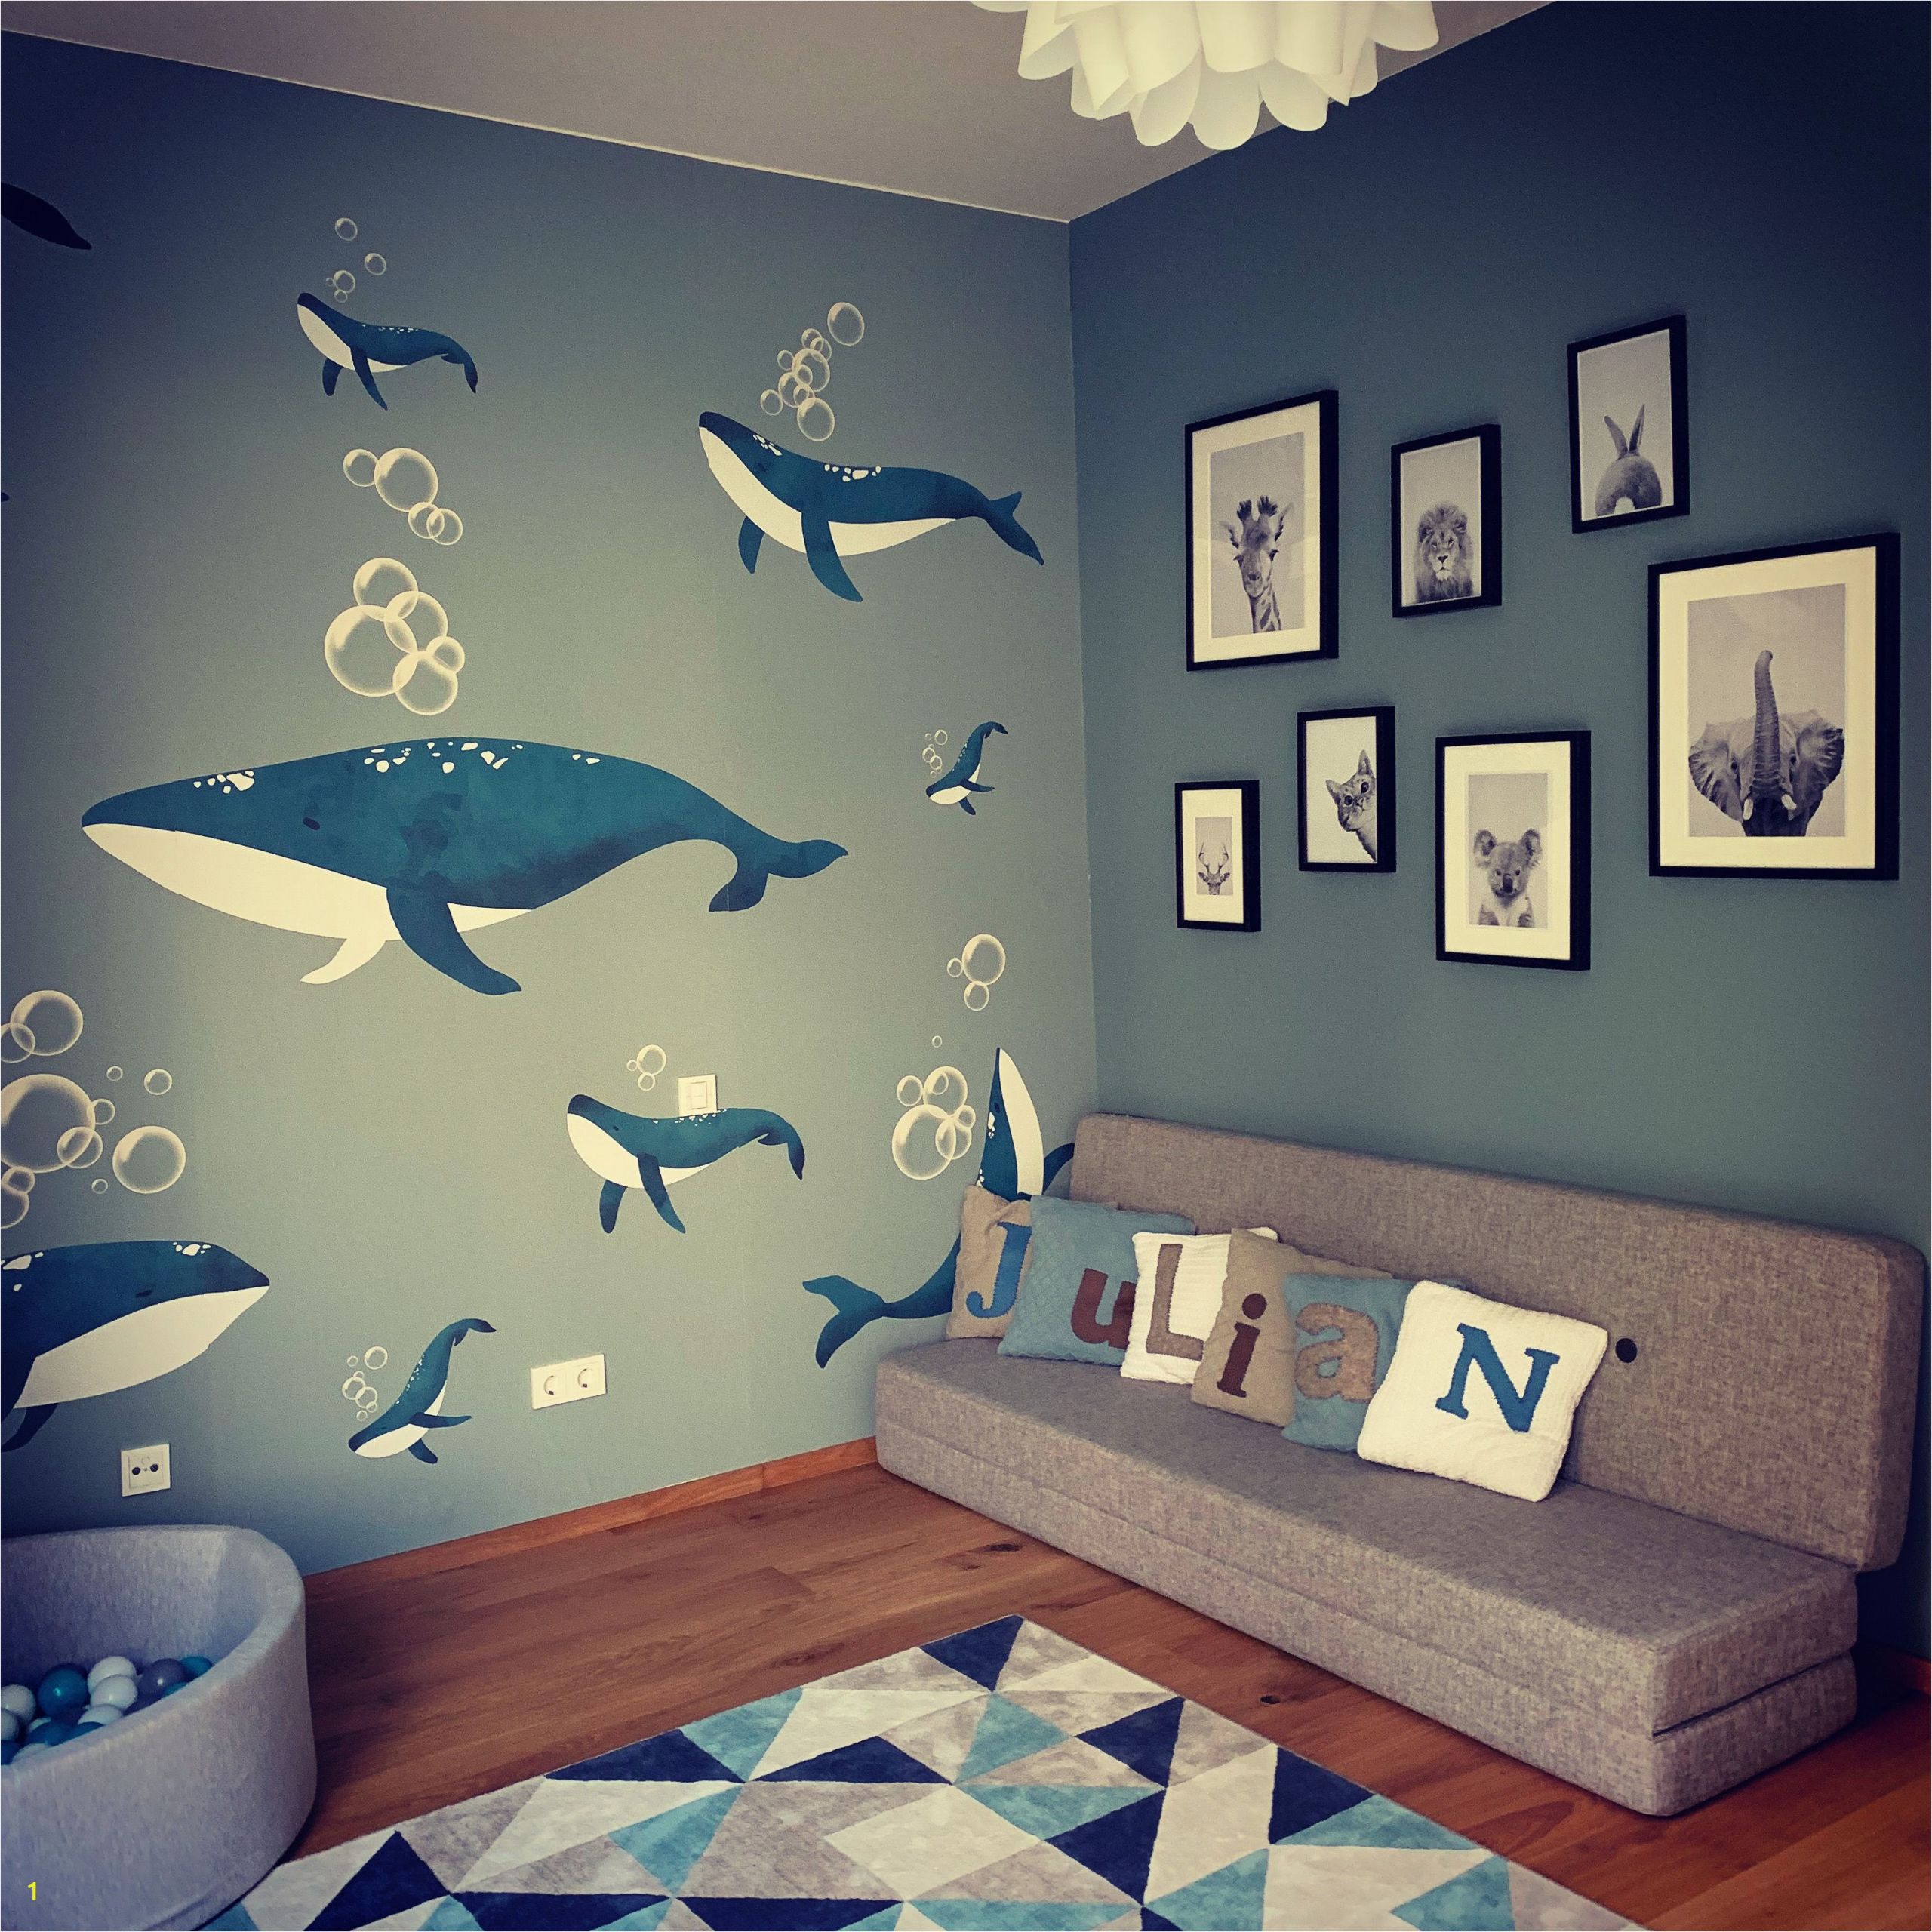 Little Girl Wall Murals Just Need to Know the Exact Measure Of Your Wall In 2020